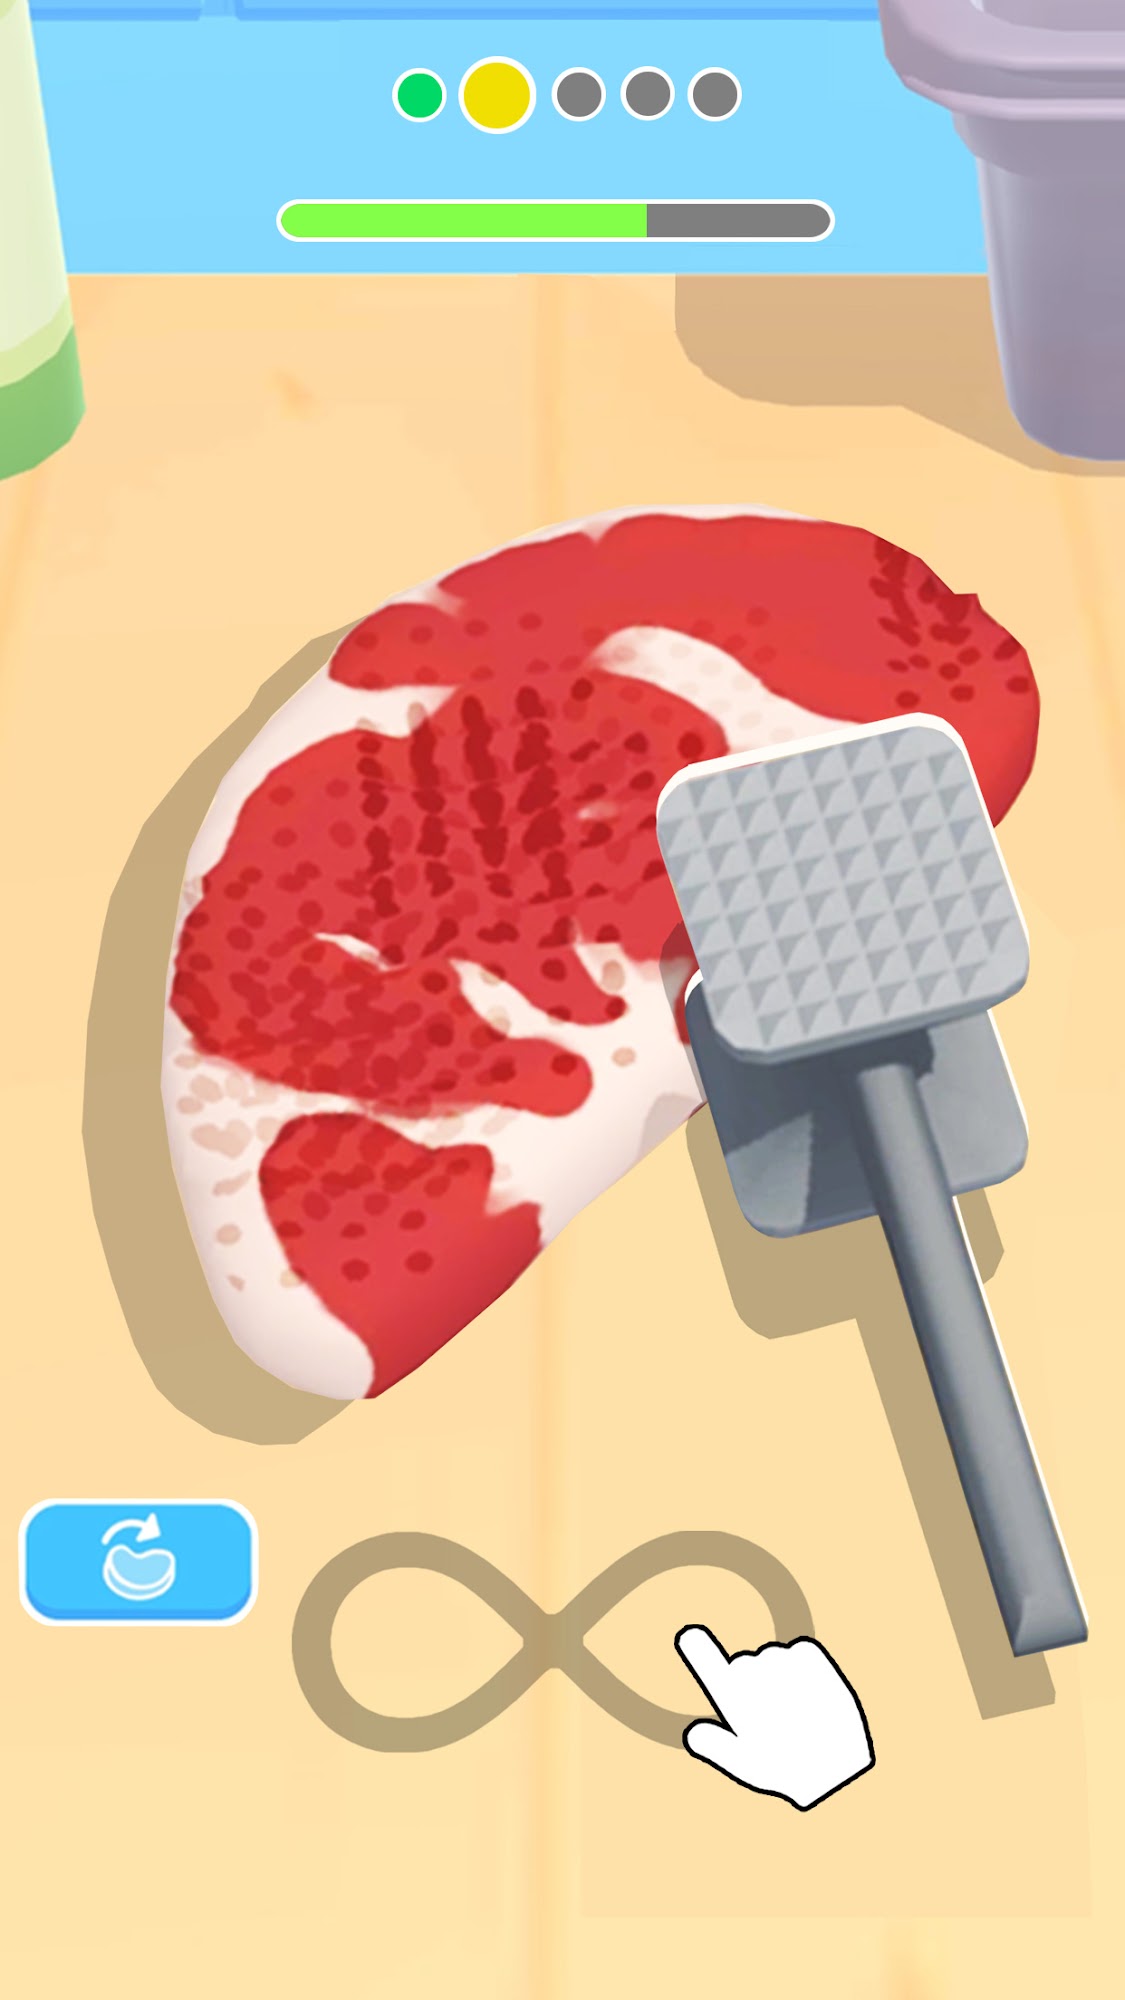 Gameplay of the King of Steaks - ASMR Cooking for Android phone or tablet.